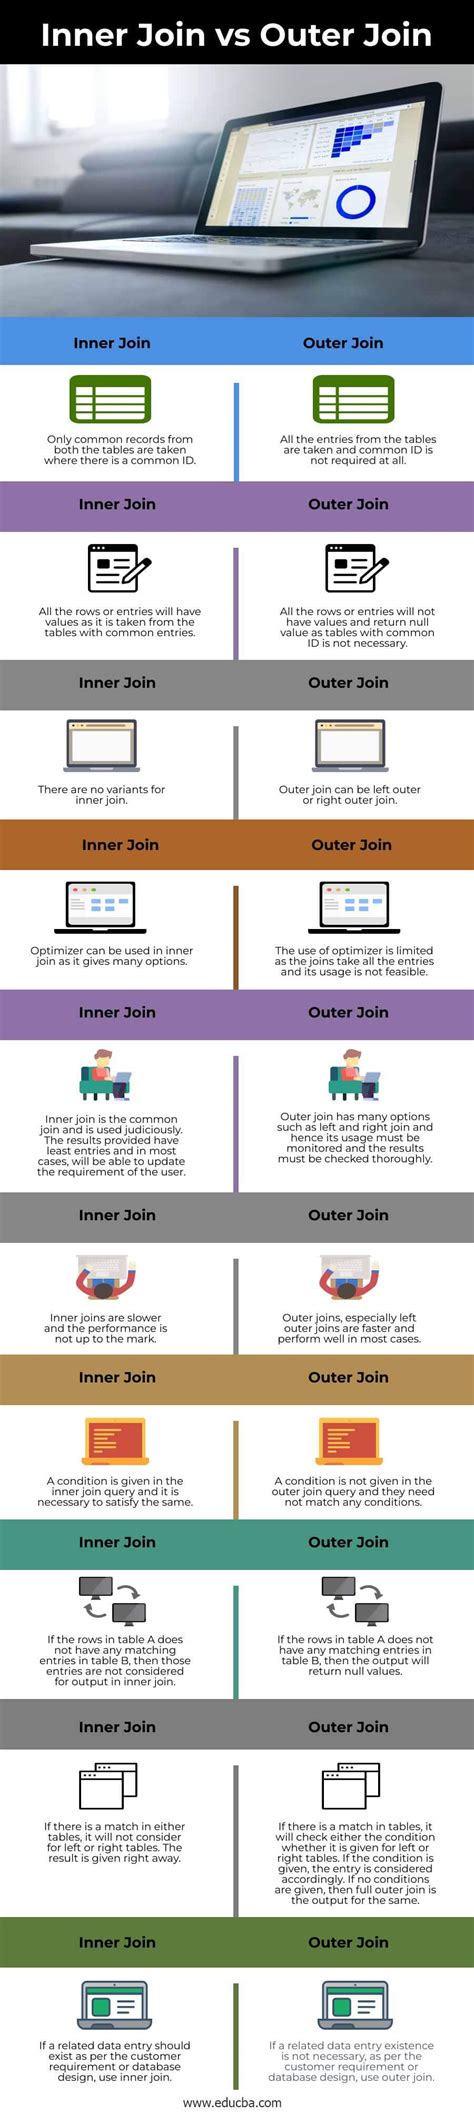 Inner Join Vs Outer Join Top Comparisons Of Inner Join Vs Outer Join